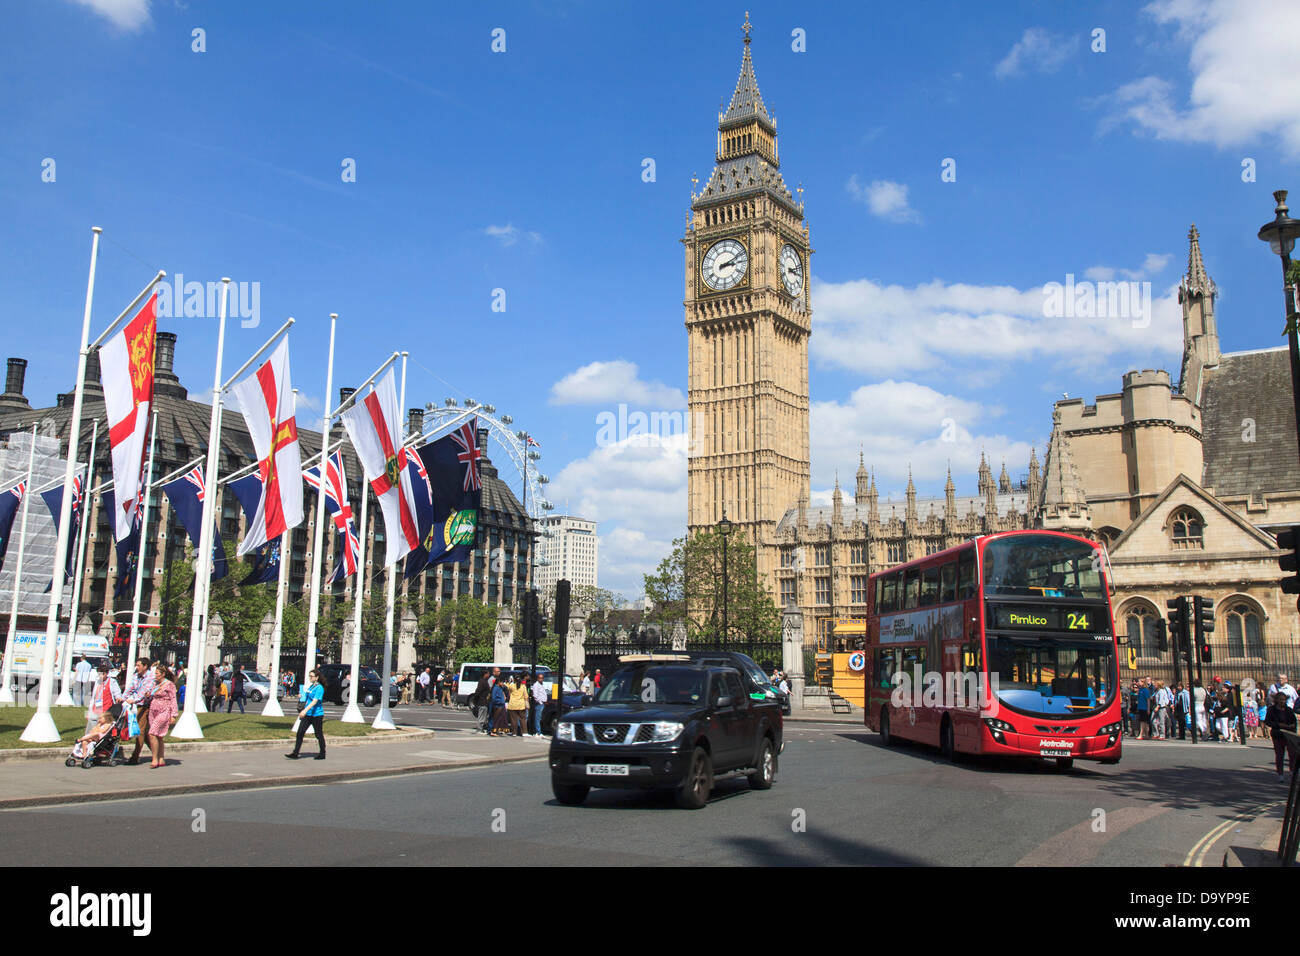 Big Ben and Houses of Parliament in London Stock Photo